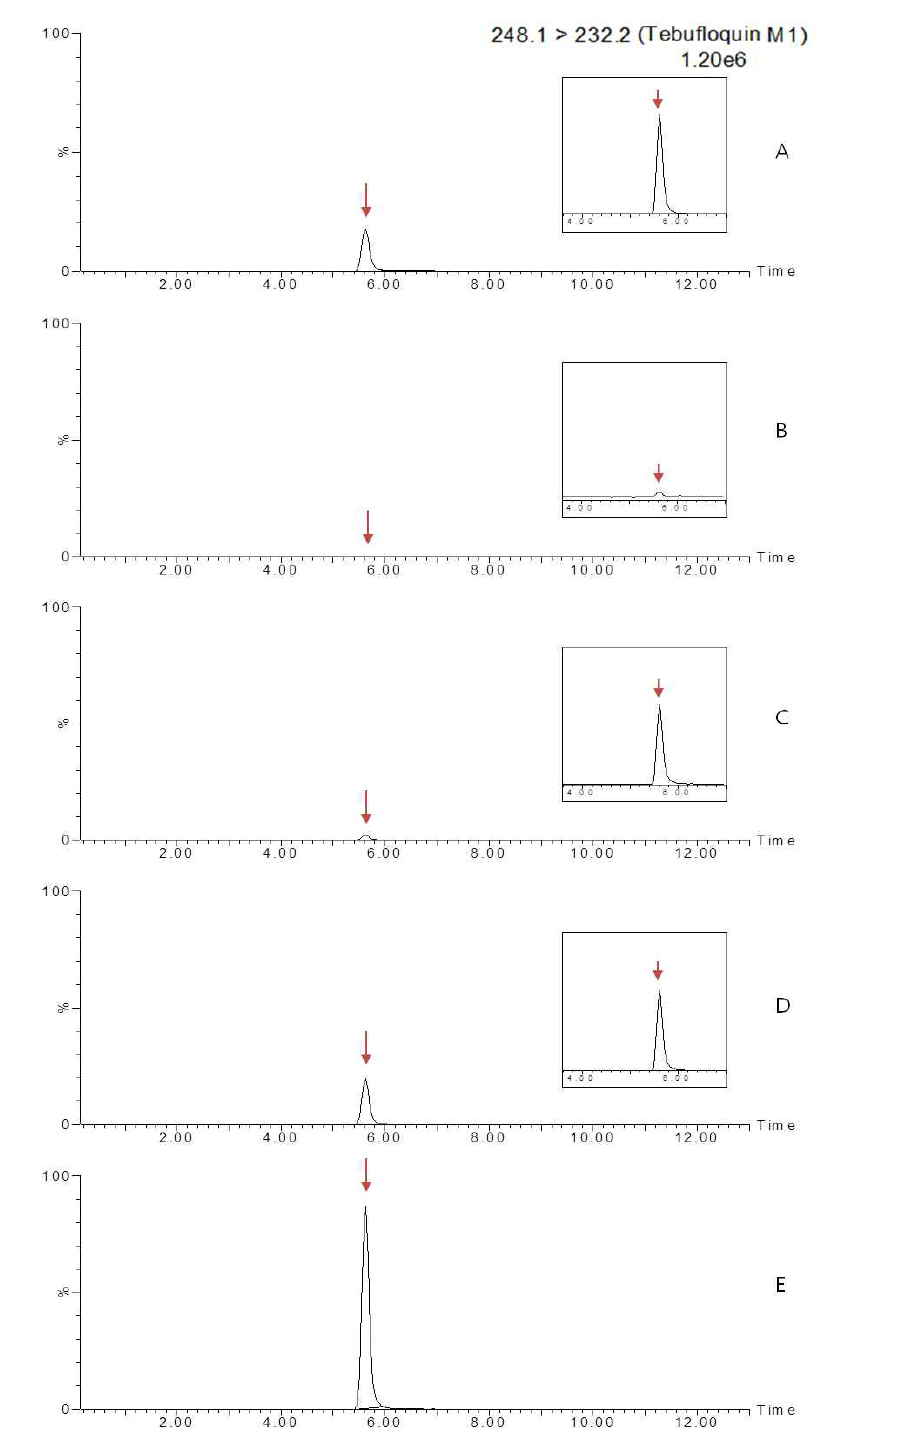 Representative MRM(quantification ion) chromatograms of tebufloquin M1 corresponding to: (A) standard solution at 1 mg/kg, (B) soybean control, (C) spiked at 0.01 mg/kg, (D) spiked at 0.1 mg/kg and (E) spiked at 0.5 mg/kg